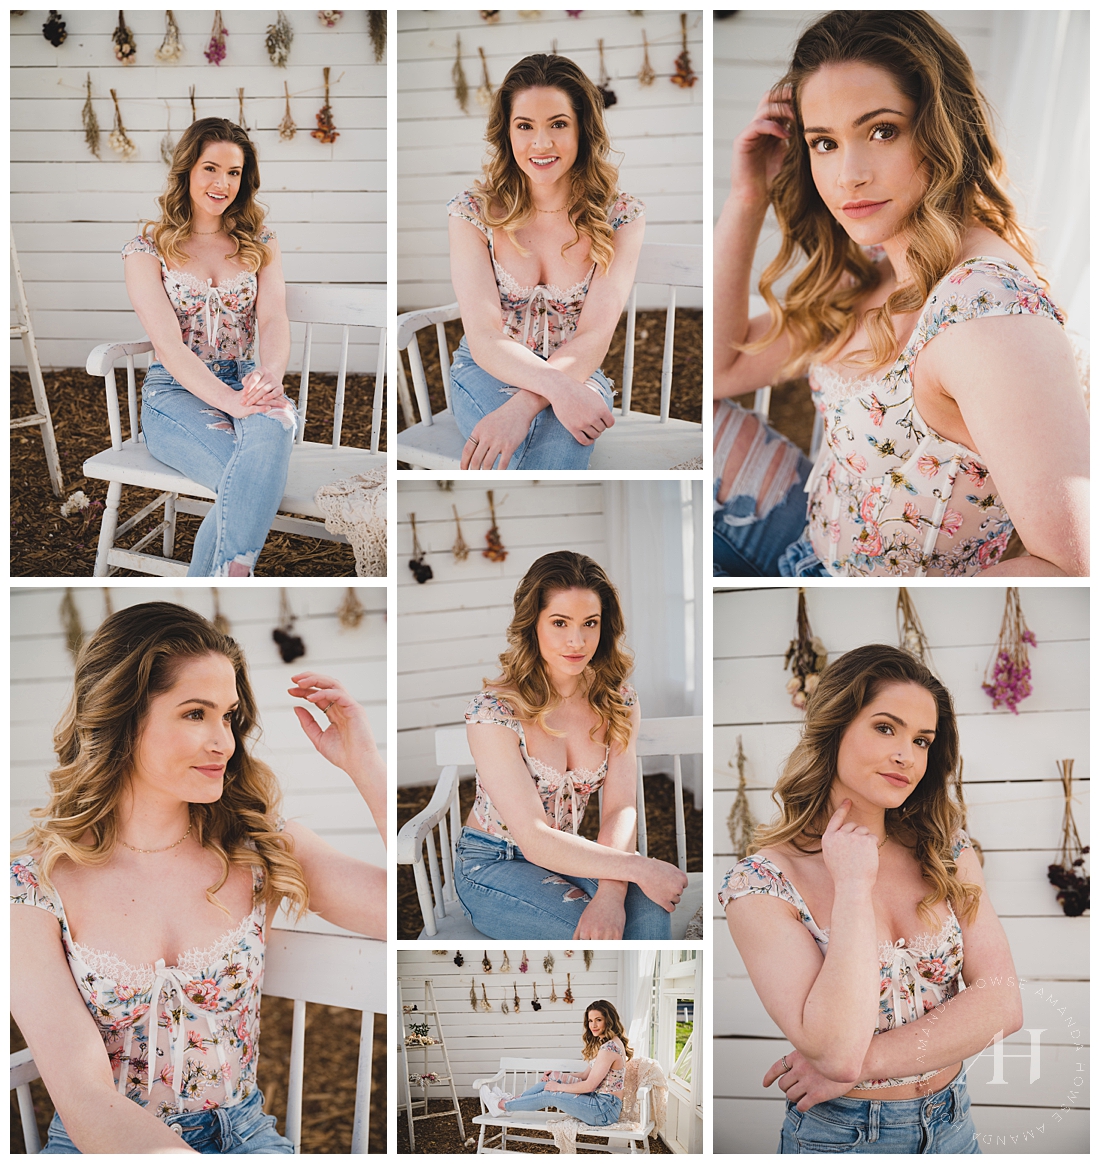 Senior Portraits with Vintage Style | Floral Corset, Jeans, Outfit Inspo for Senior Photos | Photographed by the Best Tacoma Senior Portrait Photographer Amanda Howse Photography 